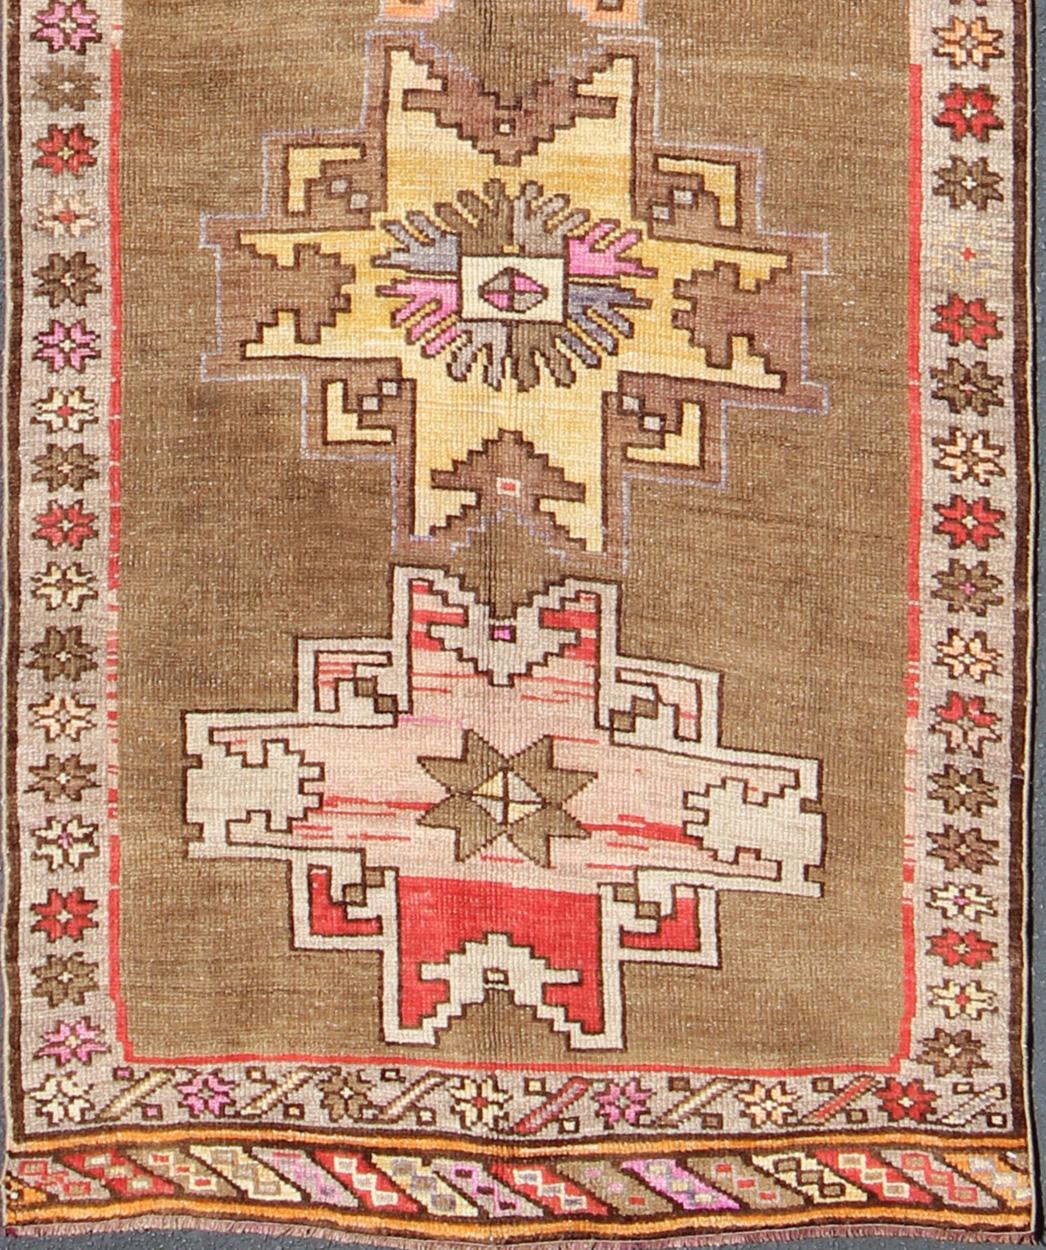 Vintage Turkish runner in greenish Brown background, ivory border with accent colors, red, pink, tan, green, bright yellow, taupe, rug/TU-UGU-4806, country of origin / type: Turkey / Oushak, circa 1940

This vintage runner features an assortment